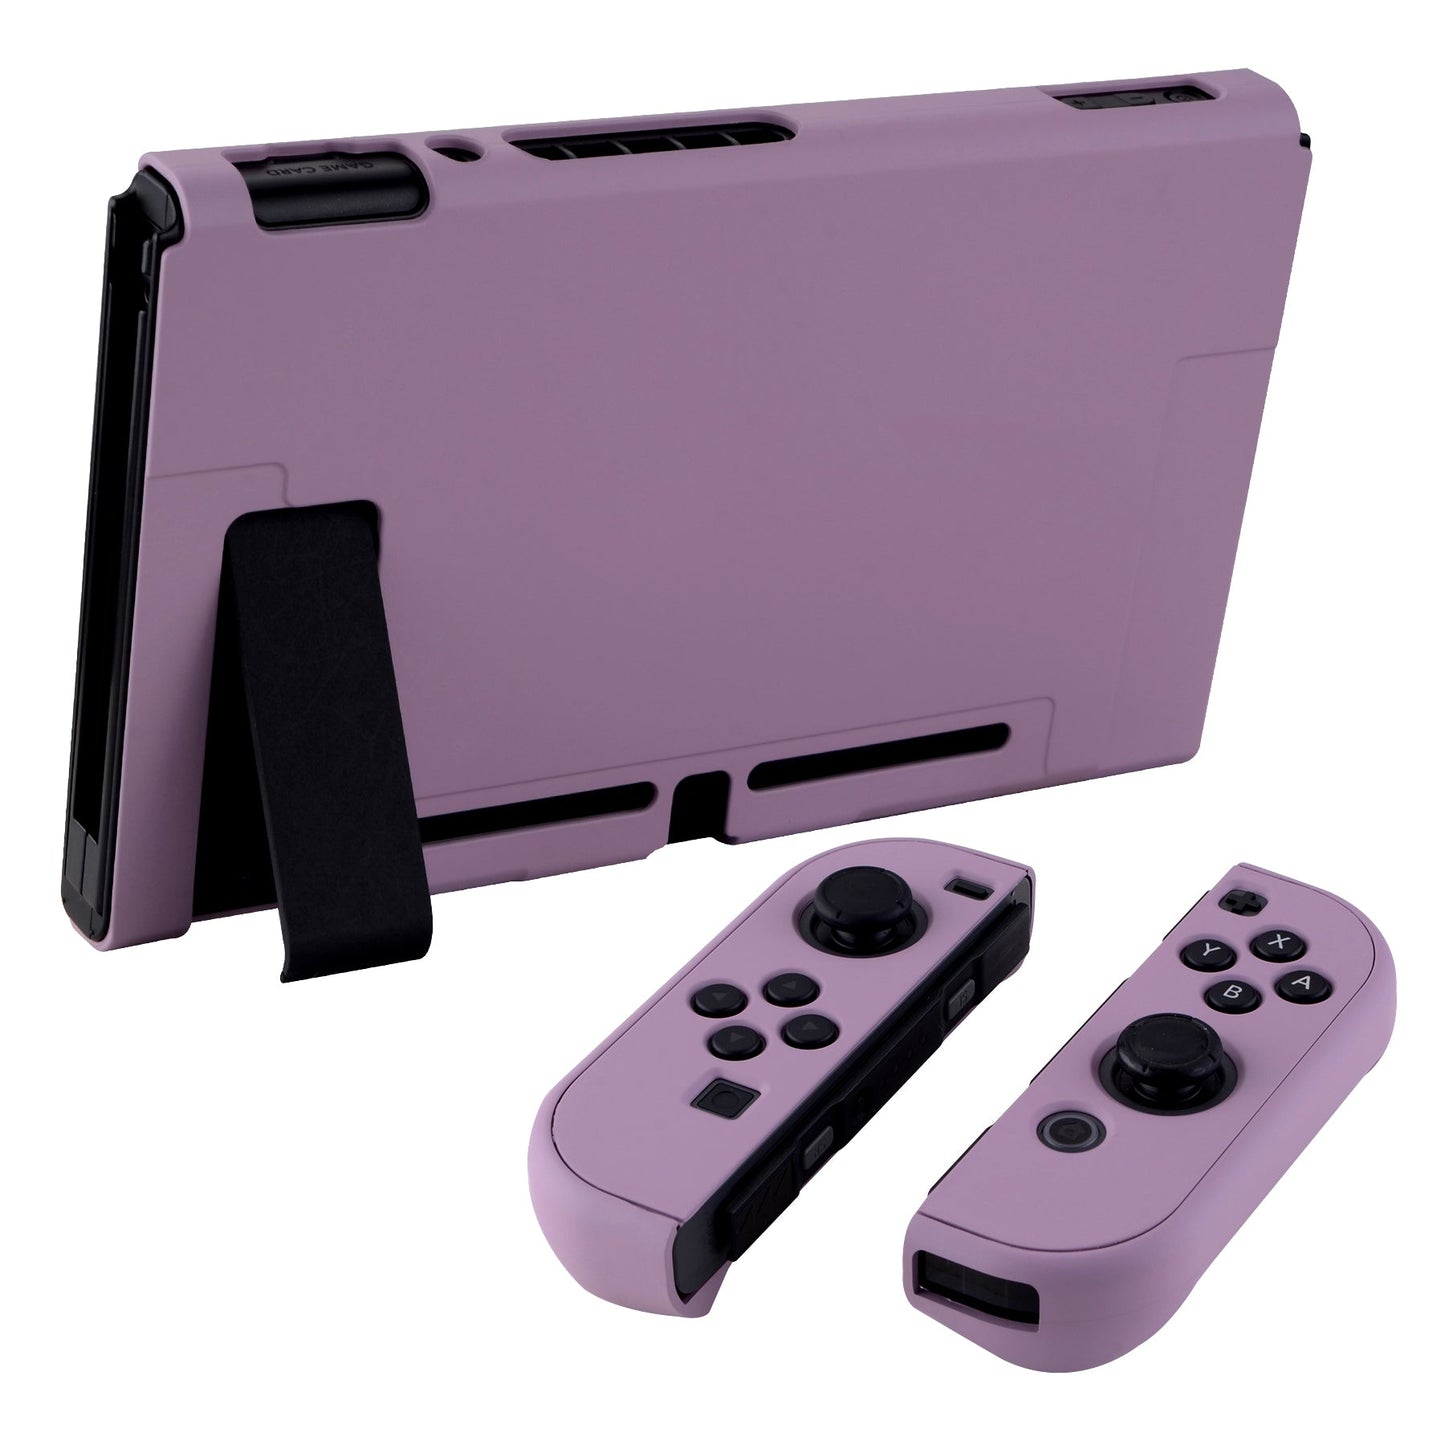 PlayVital Dark Grayish Violet Back Cover for Nintendo Switch Console, NS Joycon Handheld Controller Separable Protector Hard Shell, Soft Touch Customized Dockable Protective Case for Nintendo Switch - NTP328 PlayVital